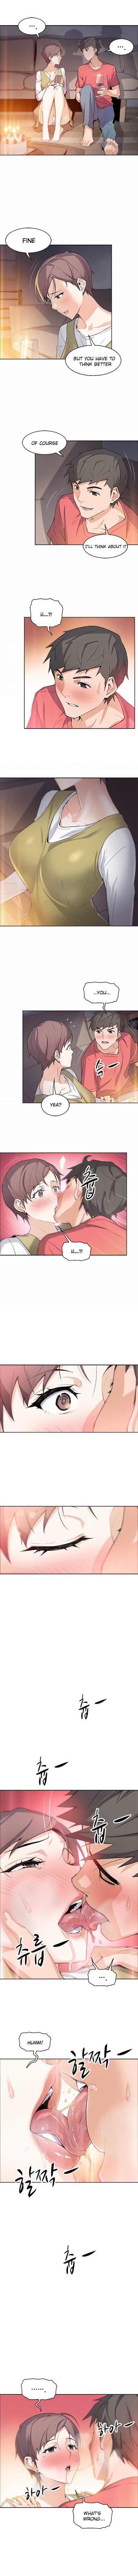 Housekeeper [Neck Pillow, Paper] Ch.49/49 [English] [Manhwa PDF] Completed 4